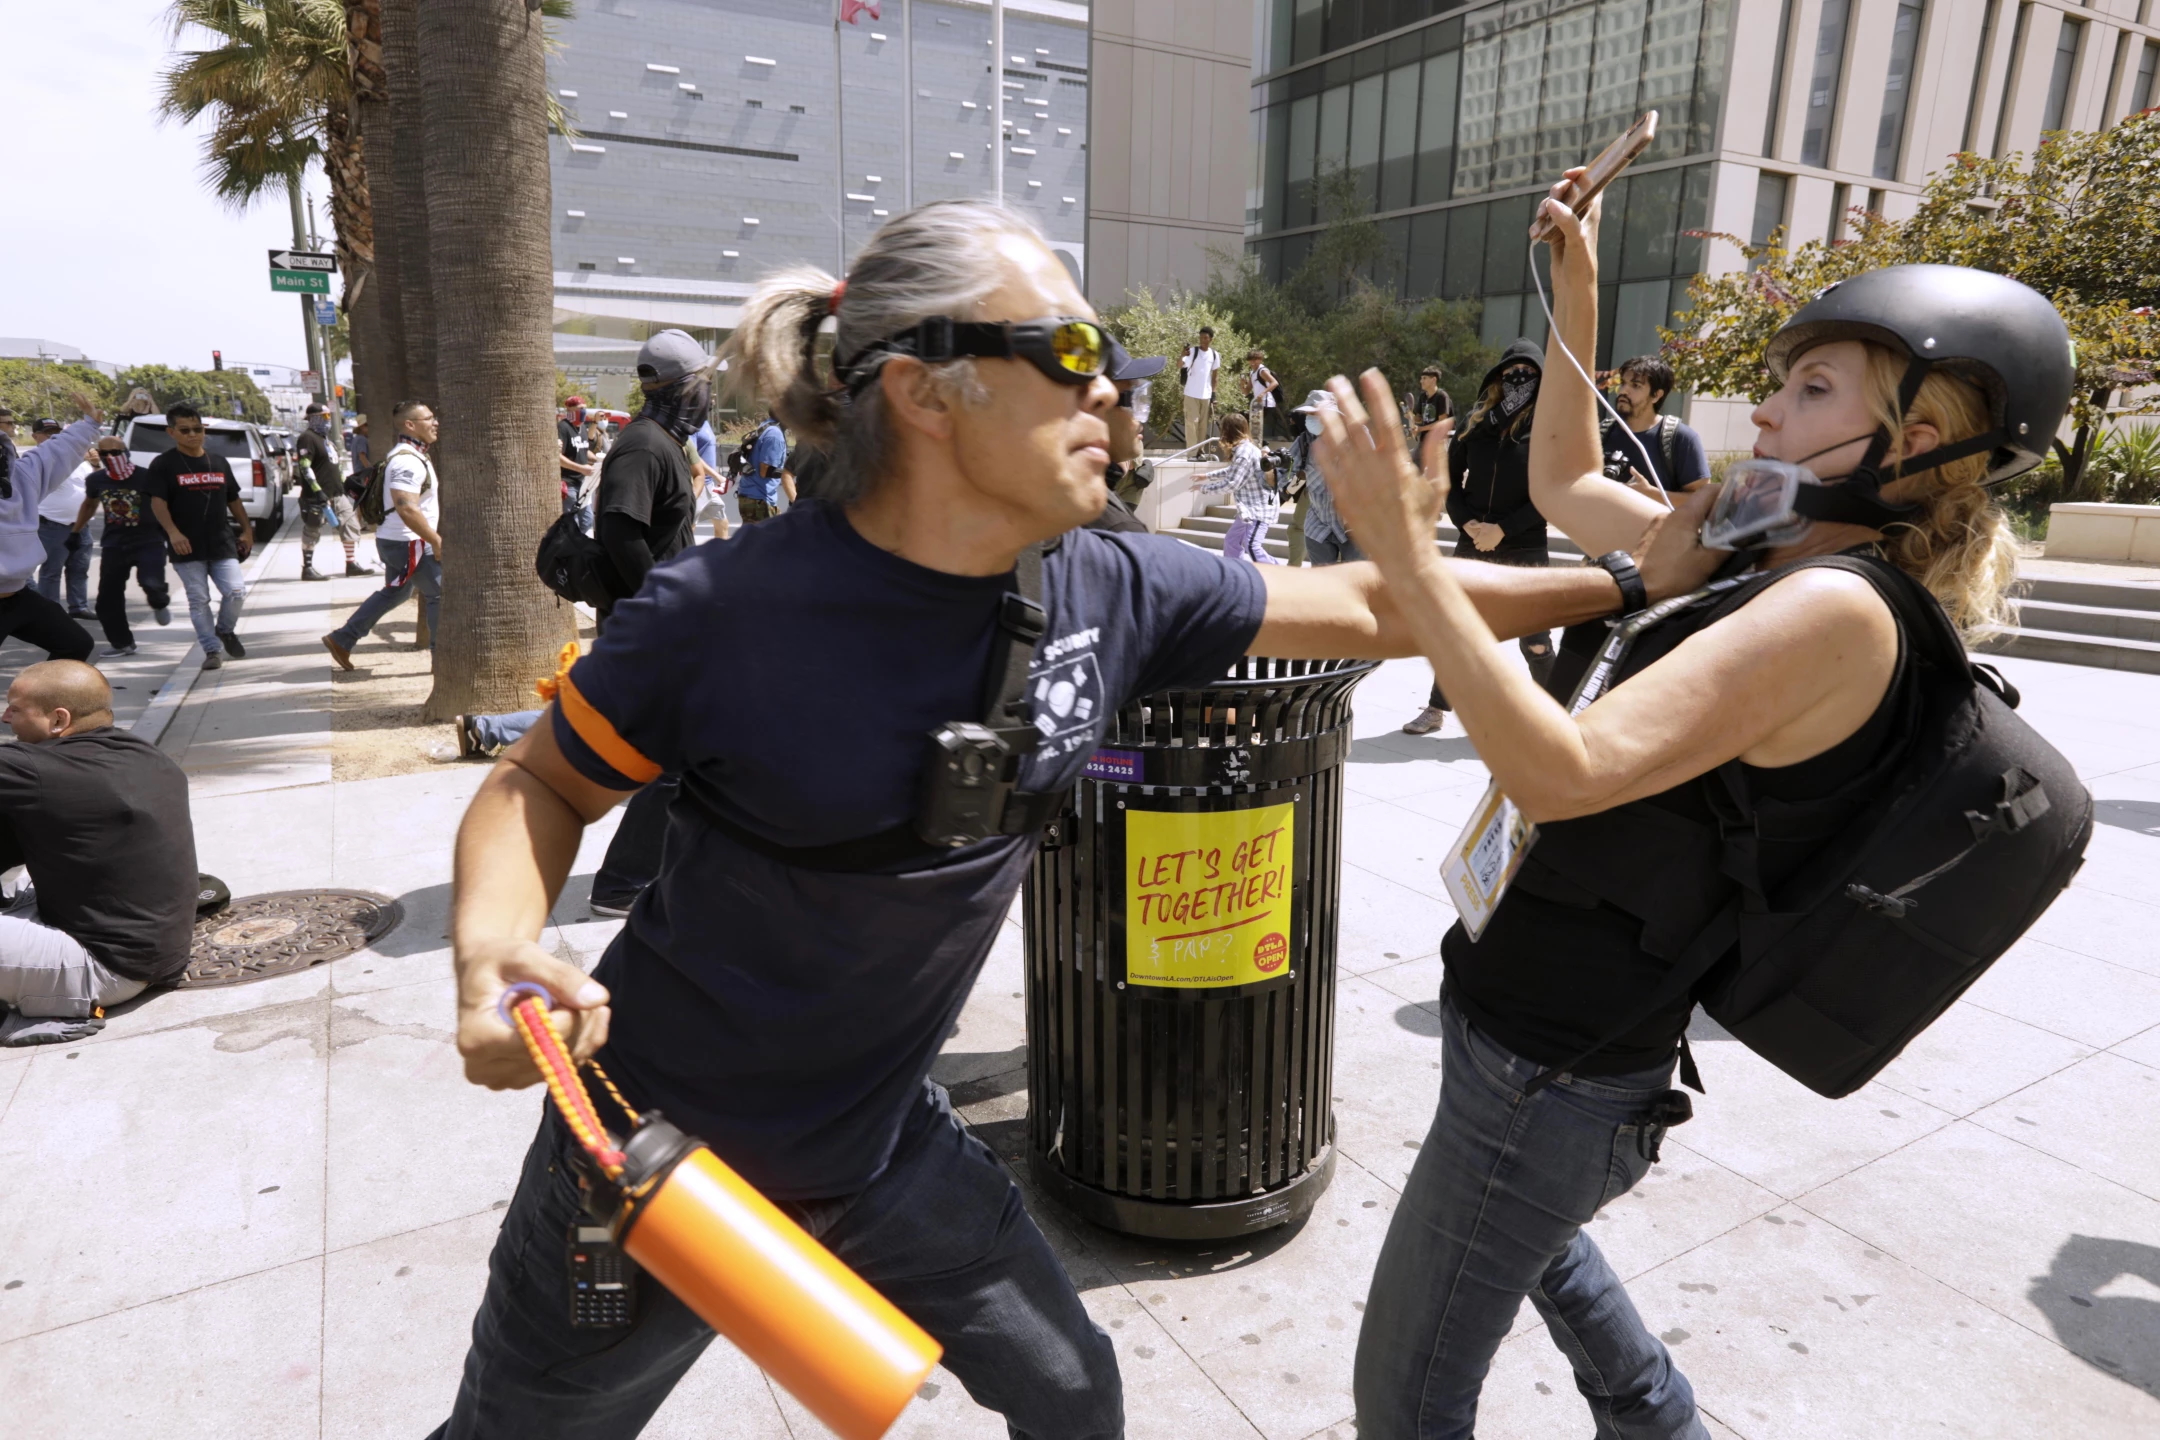 An anti-vaccine protester, left, attacks Status Coup journalist Tina Desiree Berg at an anti-vaxxer protest in Los Angeles on 14 August 2021. During the protest, one man screamed, “unmask them all” and clawed at a woman’s face. KPCC reporter Frank Stoltze walked out of the park near City Hall at was screamed at by anti-mask protesters. One man could be seen kicking him. Stoltze later told a police officer he had been assaulted while trying to conduct an interview. Stoltze later tweeted this statement: “Something happened to me today that’s never happened in 30 yrs of reporting. In LA. I was shoved, kicked and my eyeglasses were ripped off of my face by a group of guys at a protest - outside City Hall during an anti-vax Recall @GavinNewsom/Pro Trump rally.” Photo: Genaro Molina / Los Angeles Times